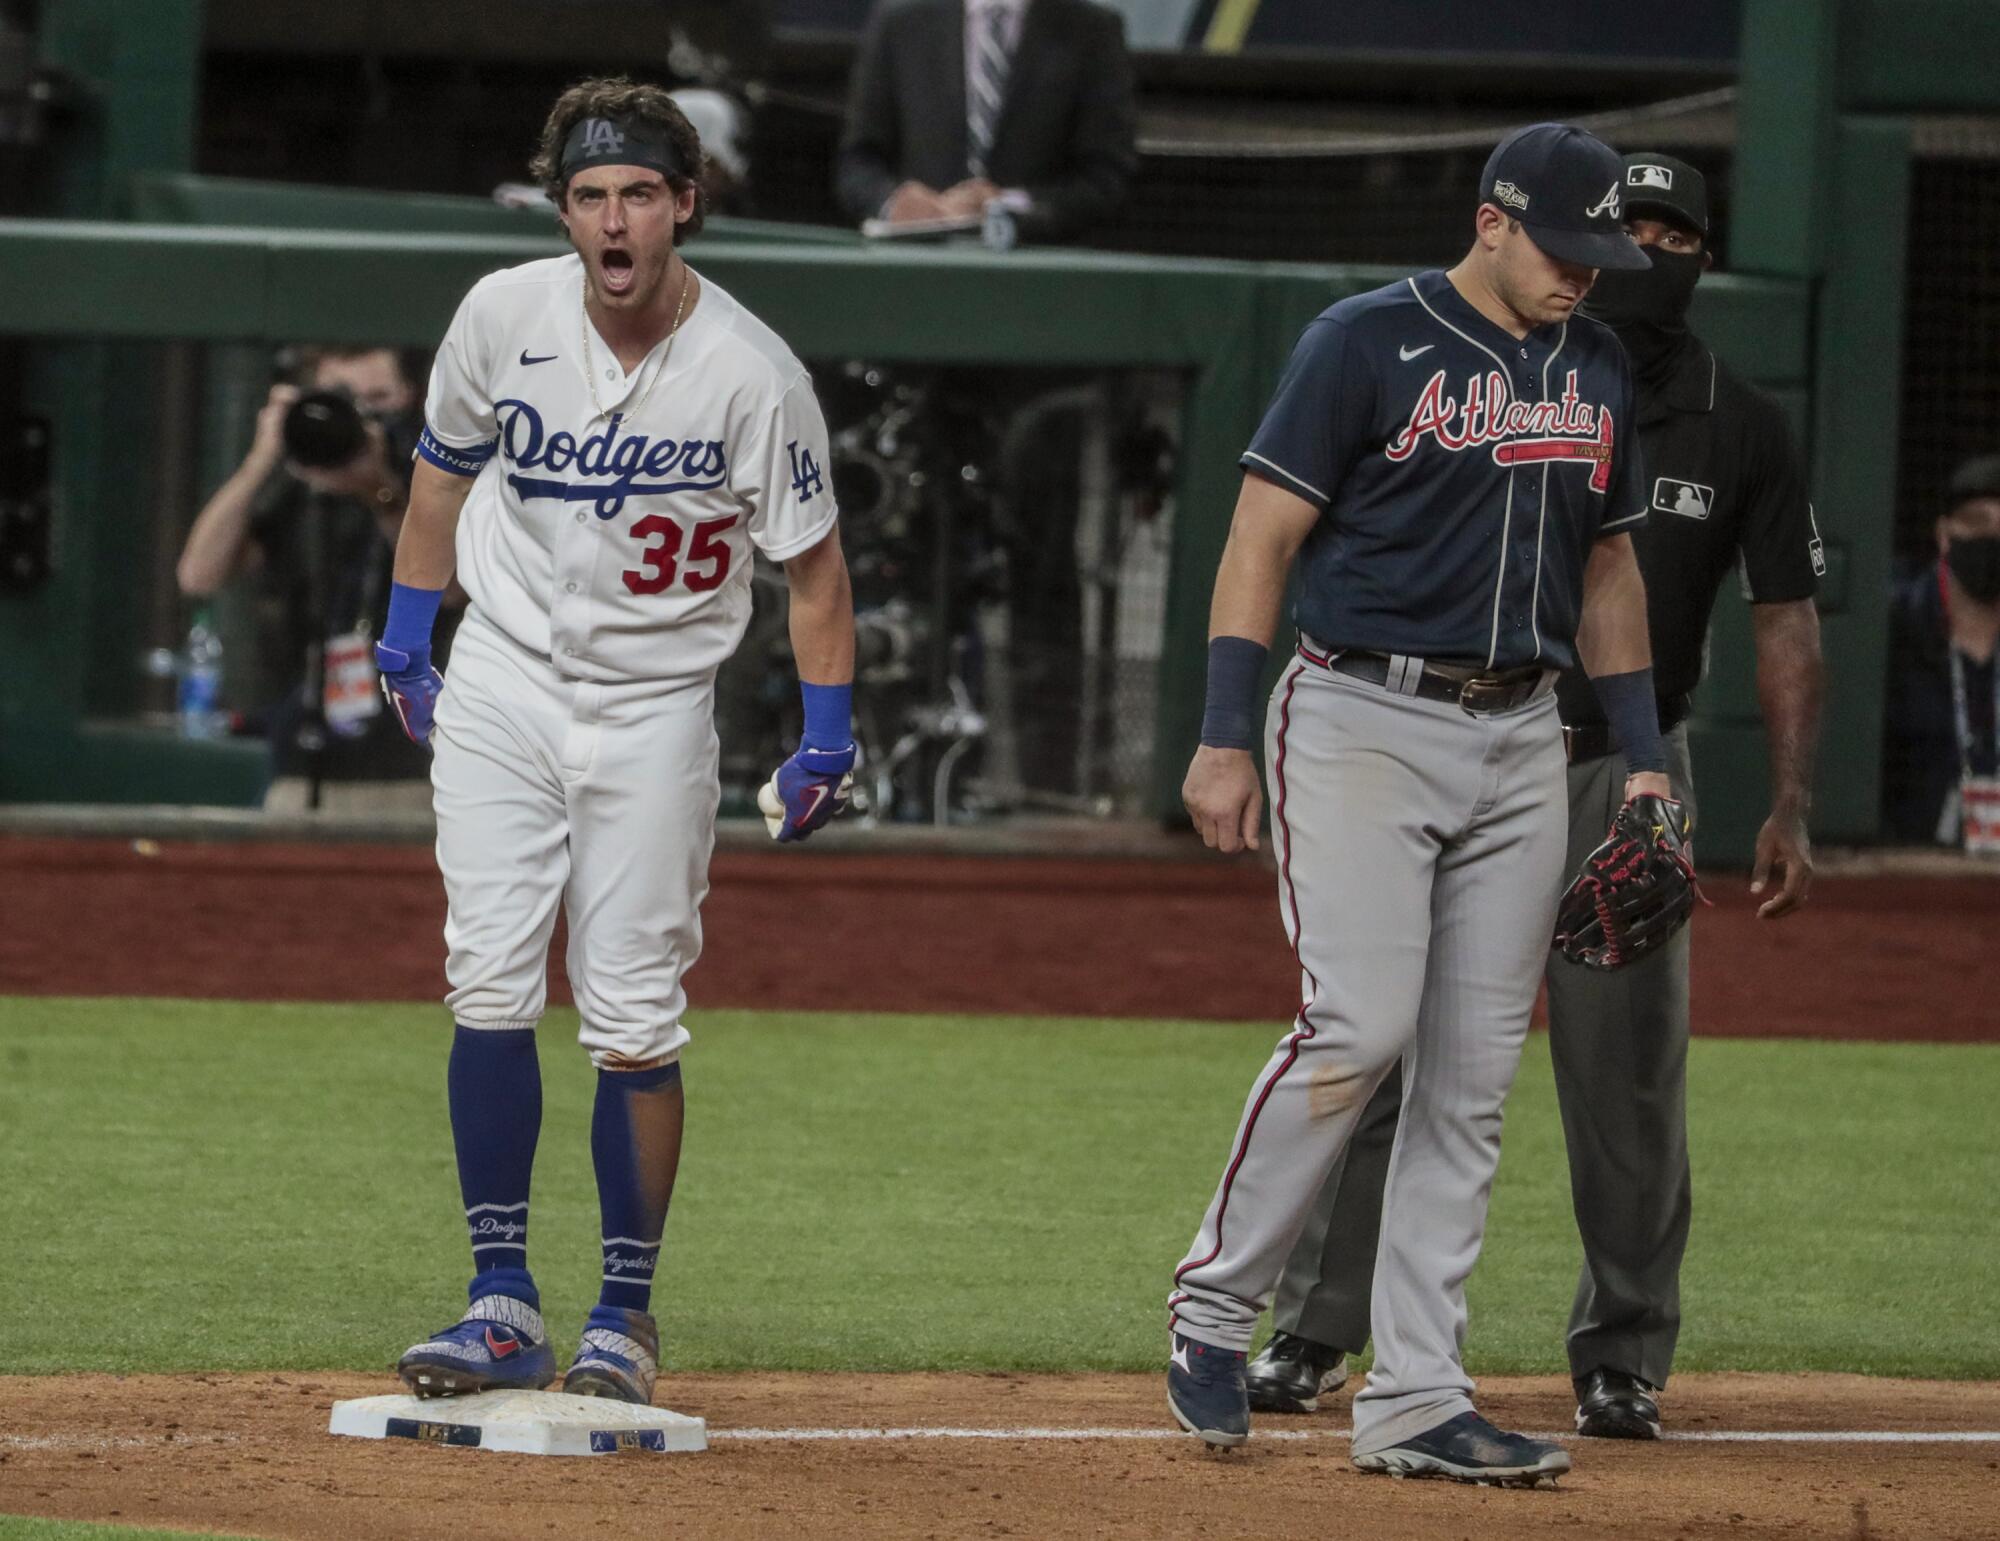 Dodgers center fielder Cody Bellinger yells out "let's go!" after hitting a run-scoring triple.